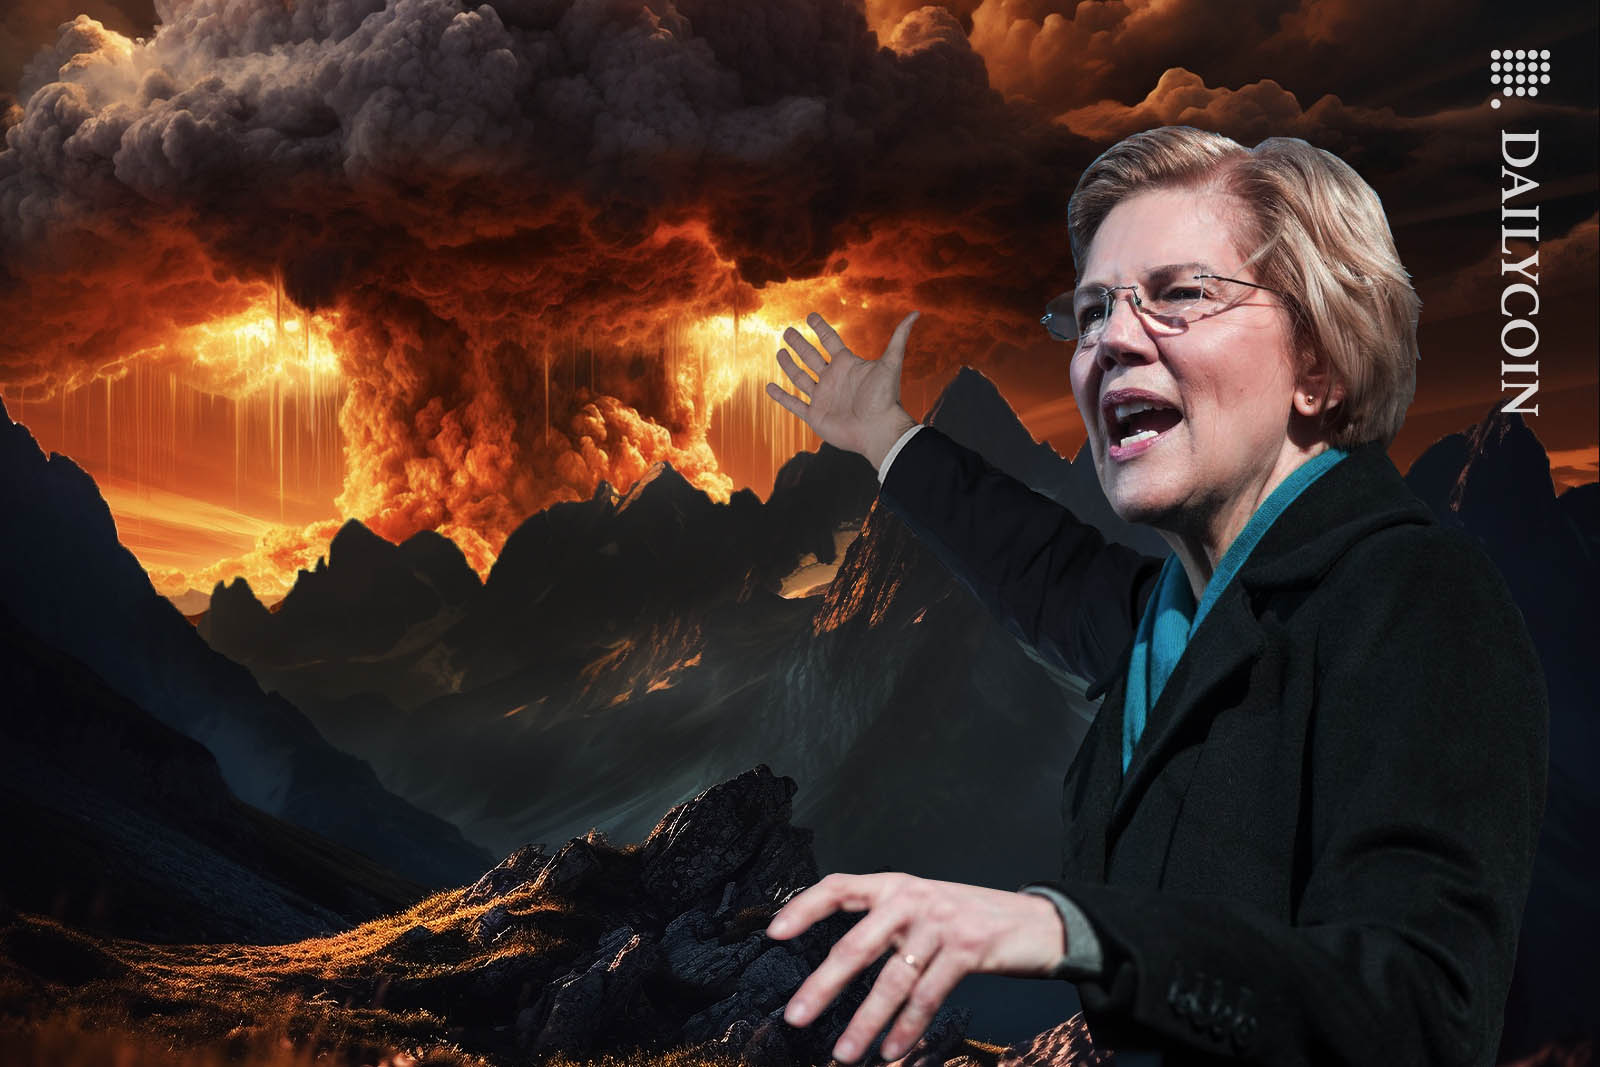 Elizabeth Warren pointing at a gigantic explosion disaster over the mountain.